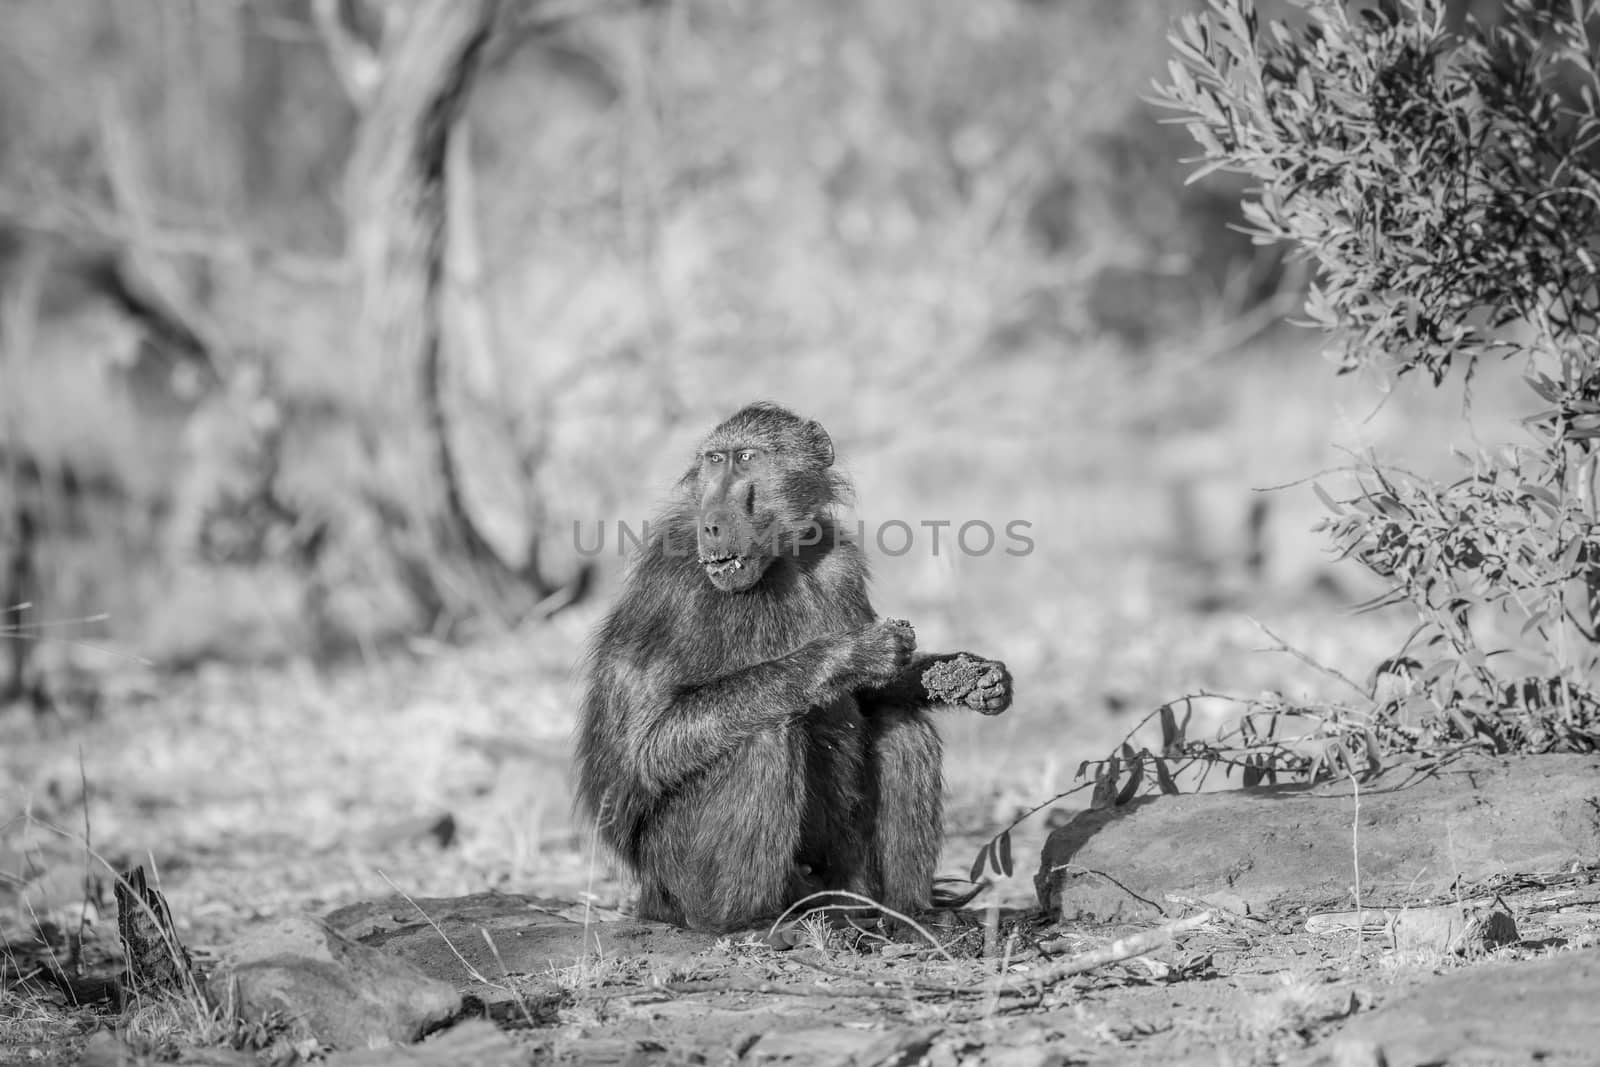 Chacma baboon sitting and eating in the grass in black and white in the Welgevonden game reserve, South Africa.